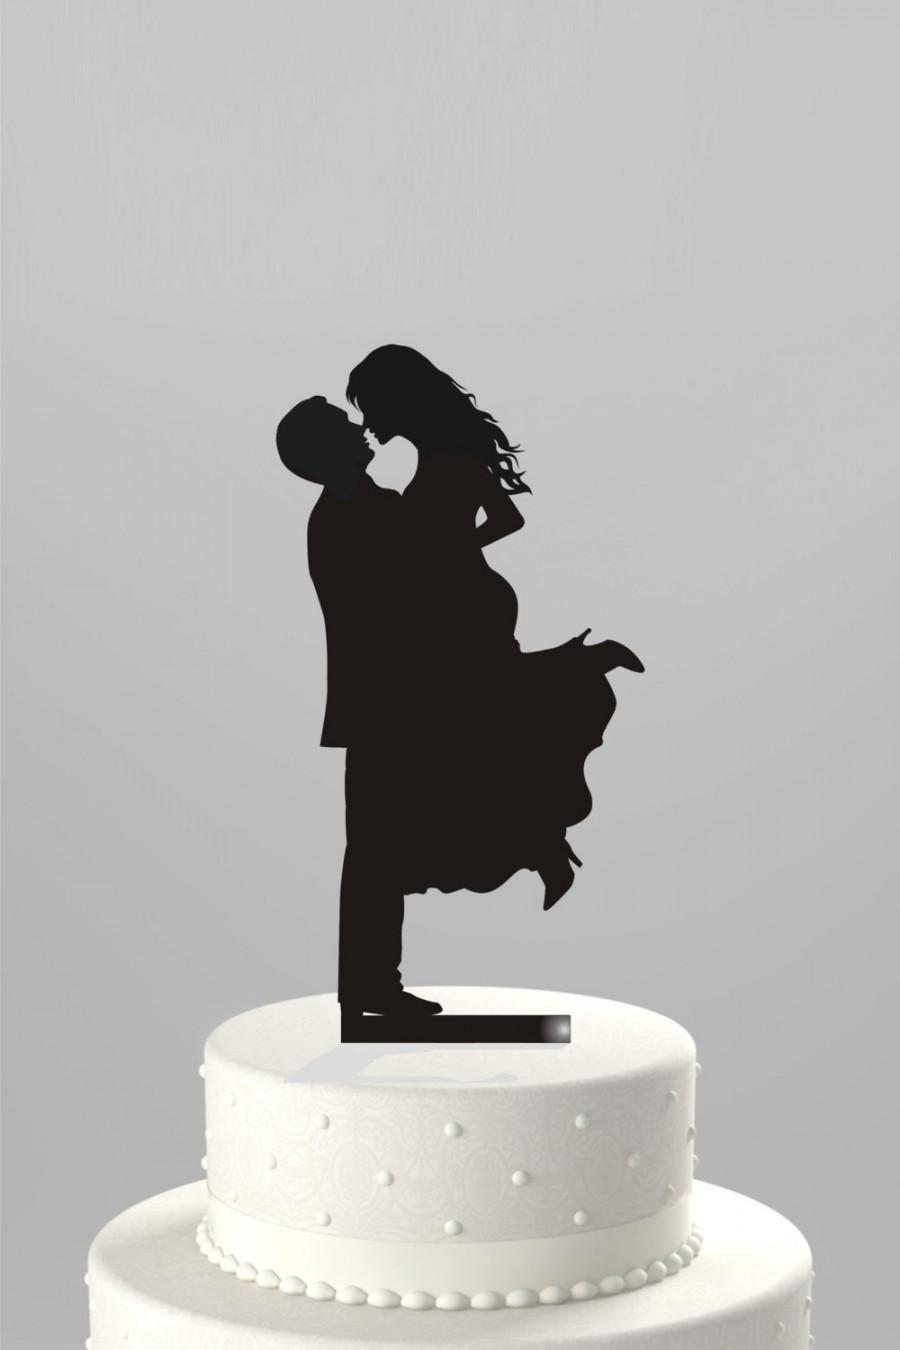 Mariage - SALE Price!! Ships Next Day - Wedding Cake Topper Silhouette Groom Lifting his Bride, BLACK Acrylic Cake Topper [CT17]